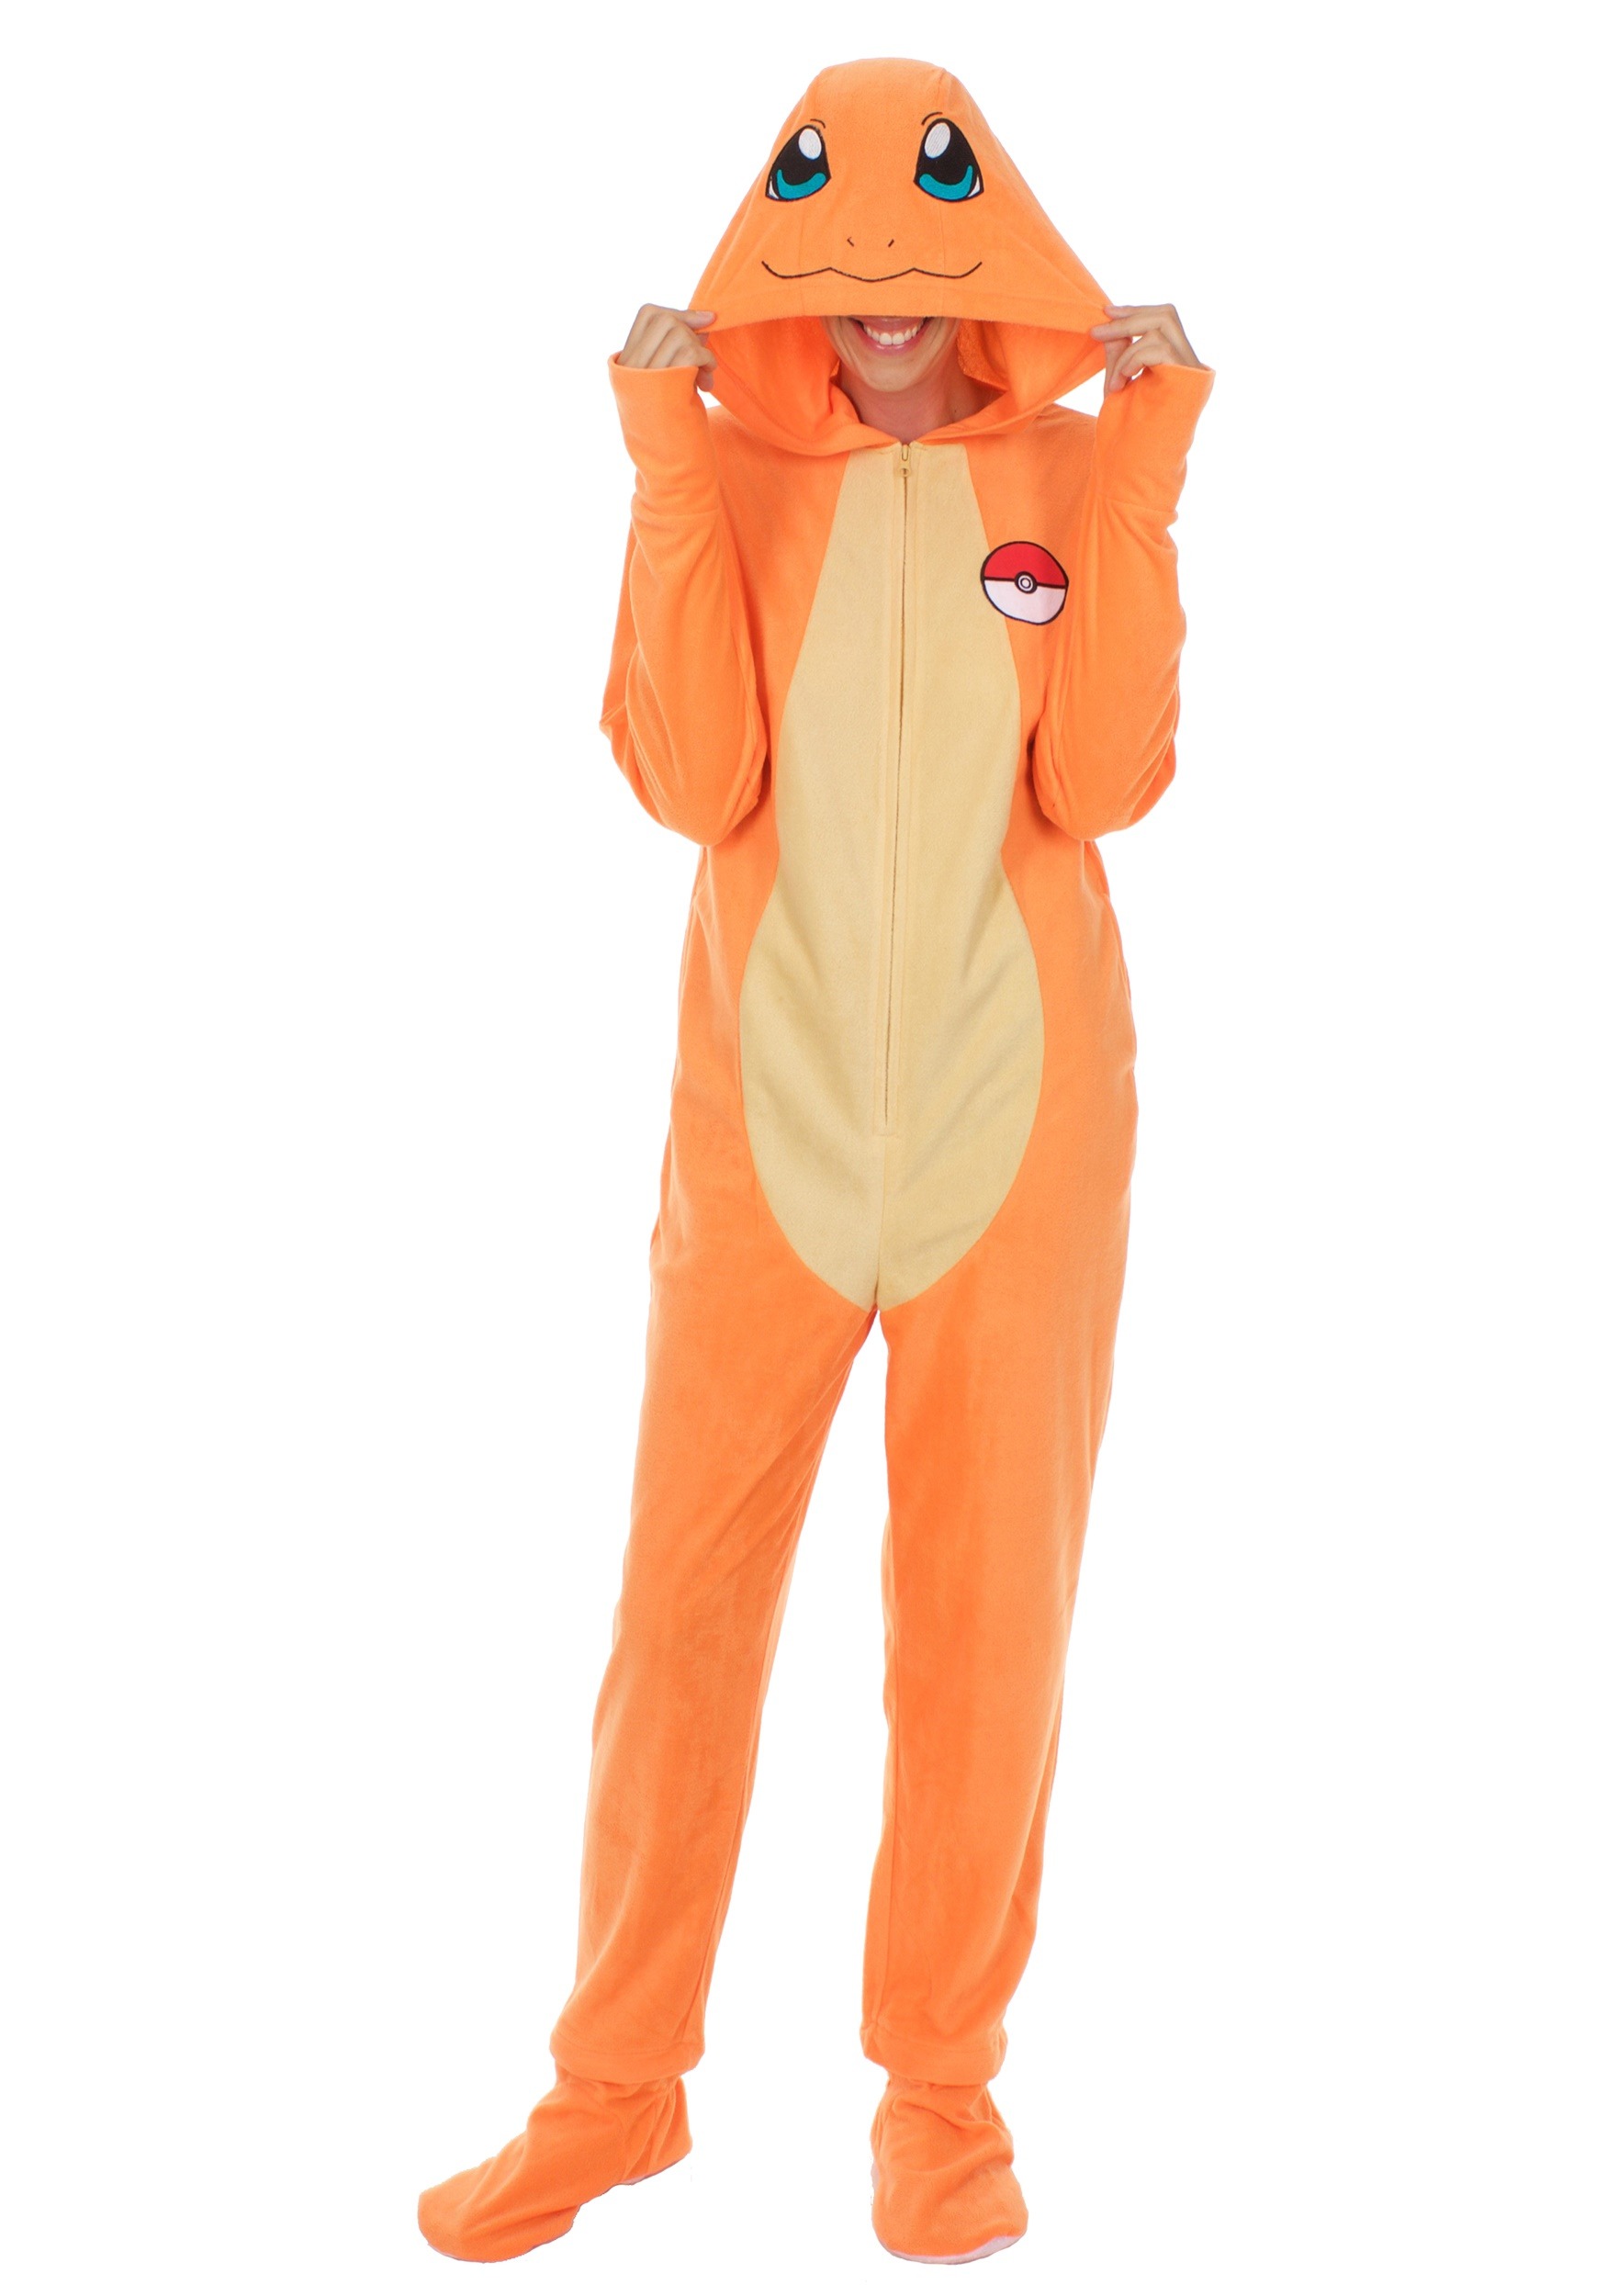 This is a Pokemon Charmander Adult Union Suit. 